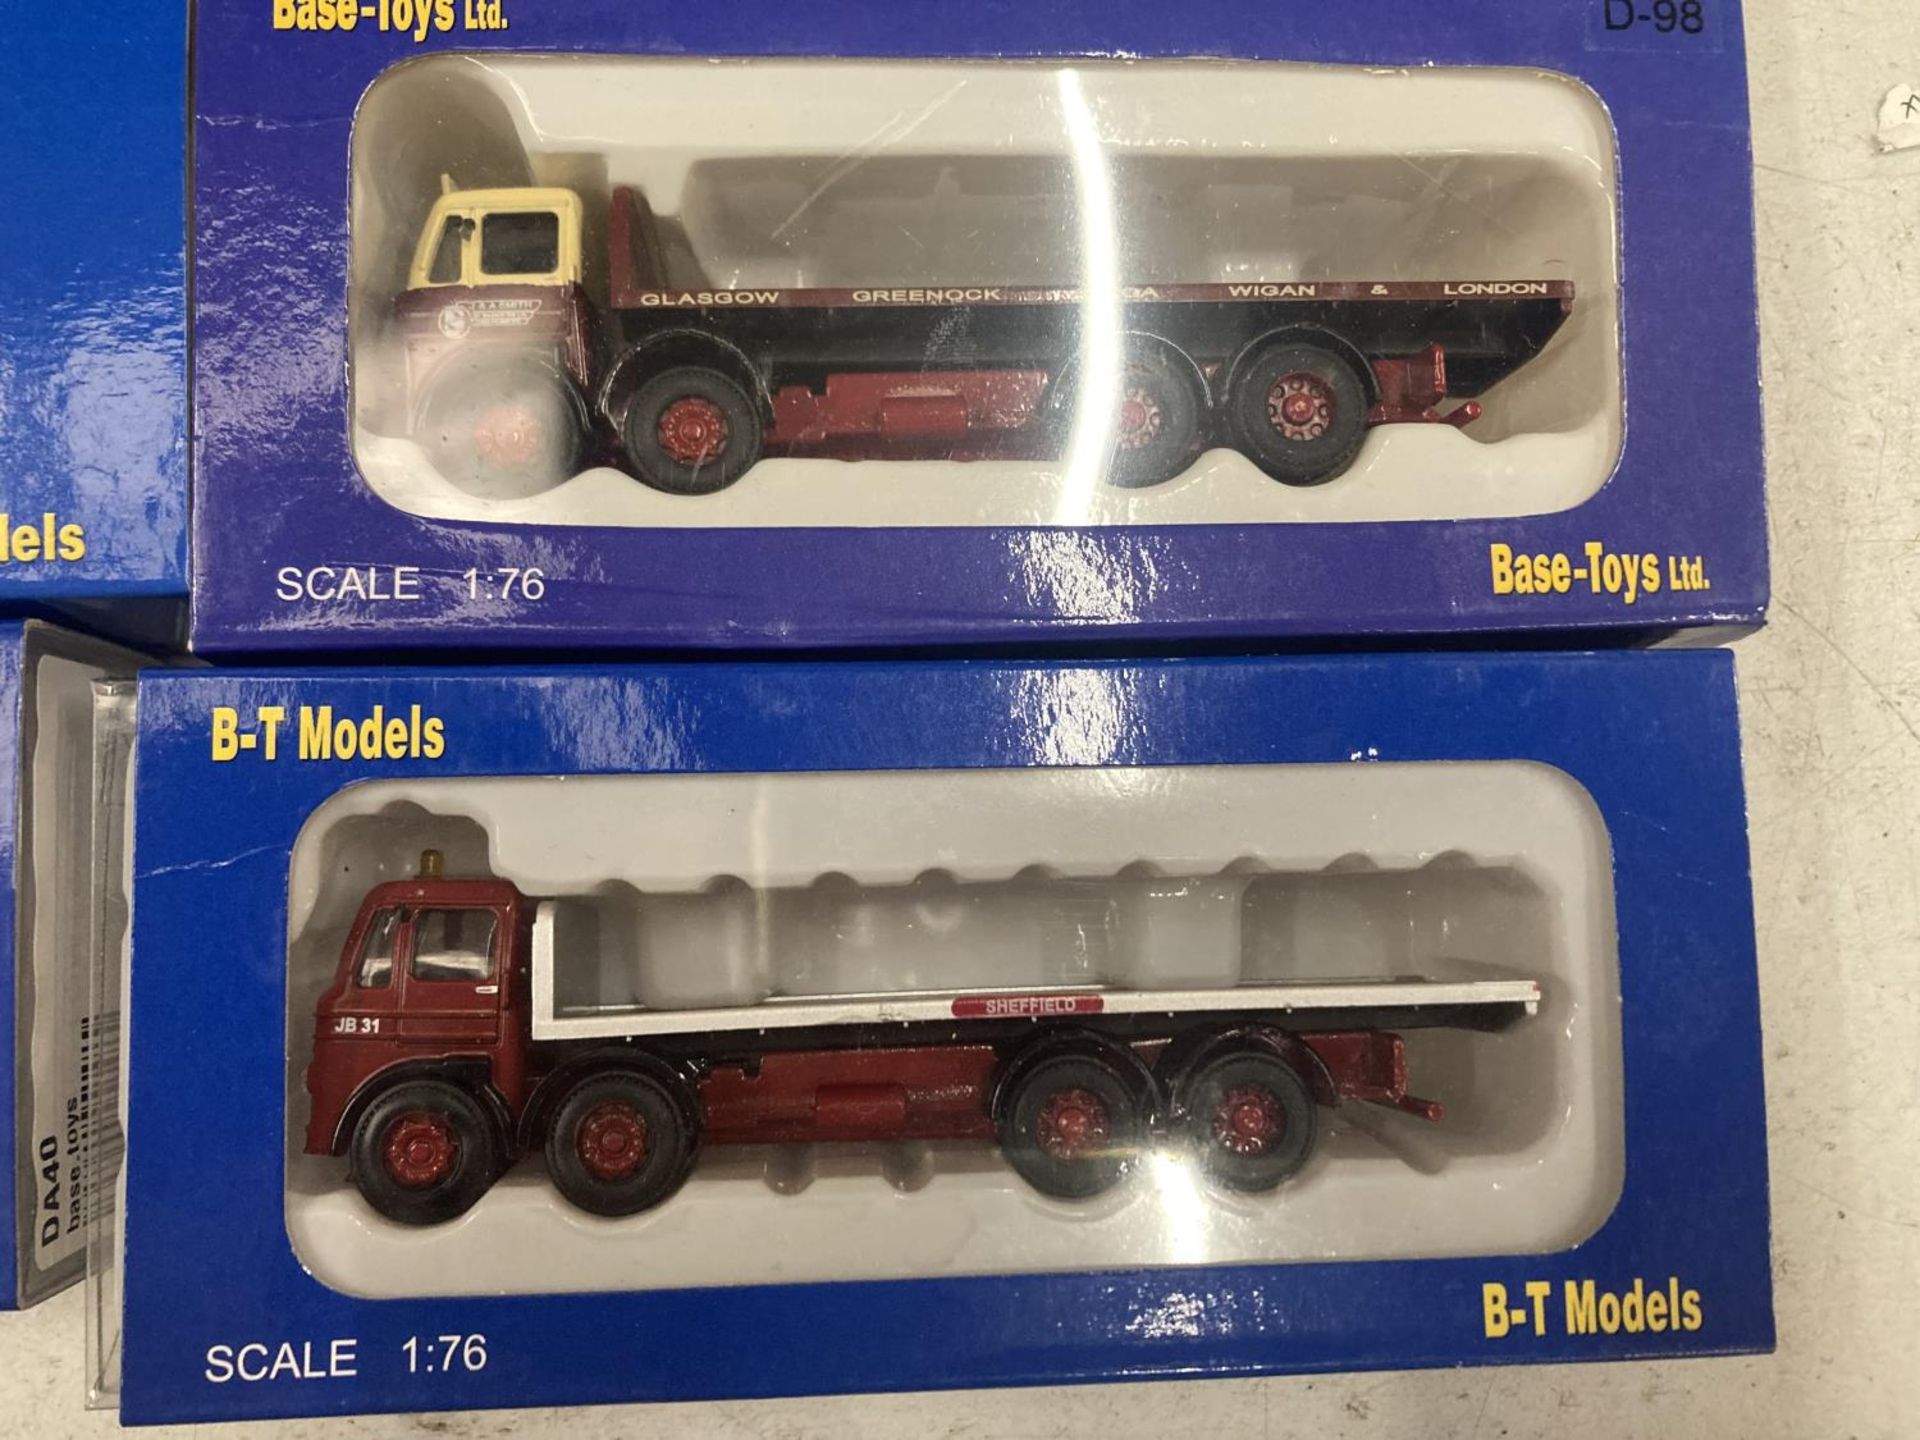 TEN BOXED B-T MODEL VEHICLES 1:76 SCALE - Image 6 of 6